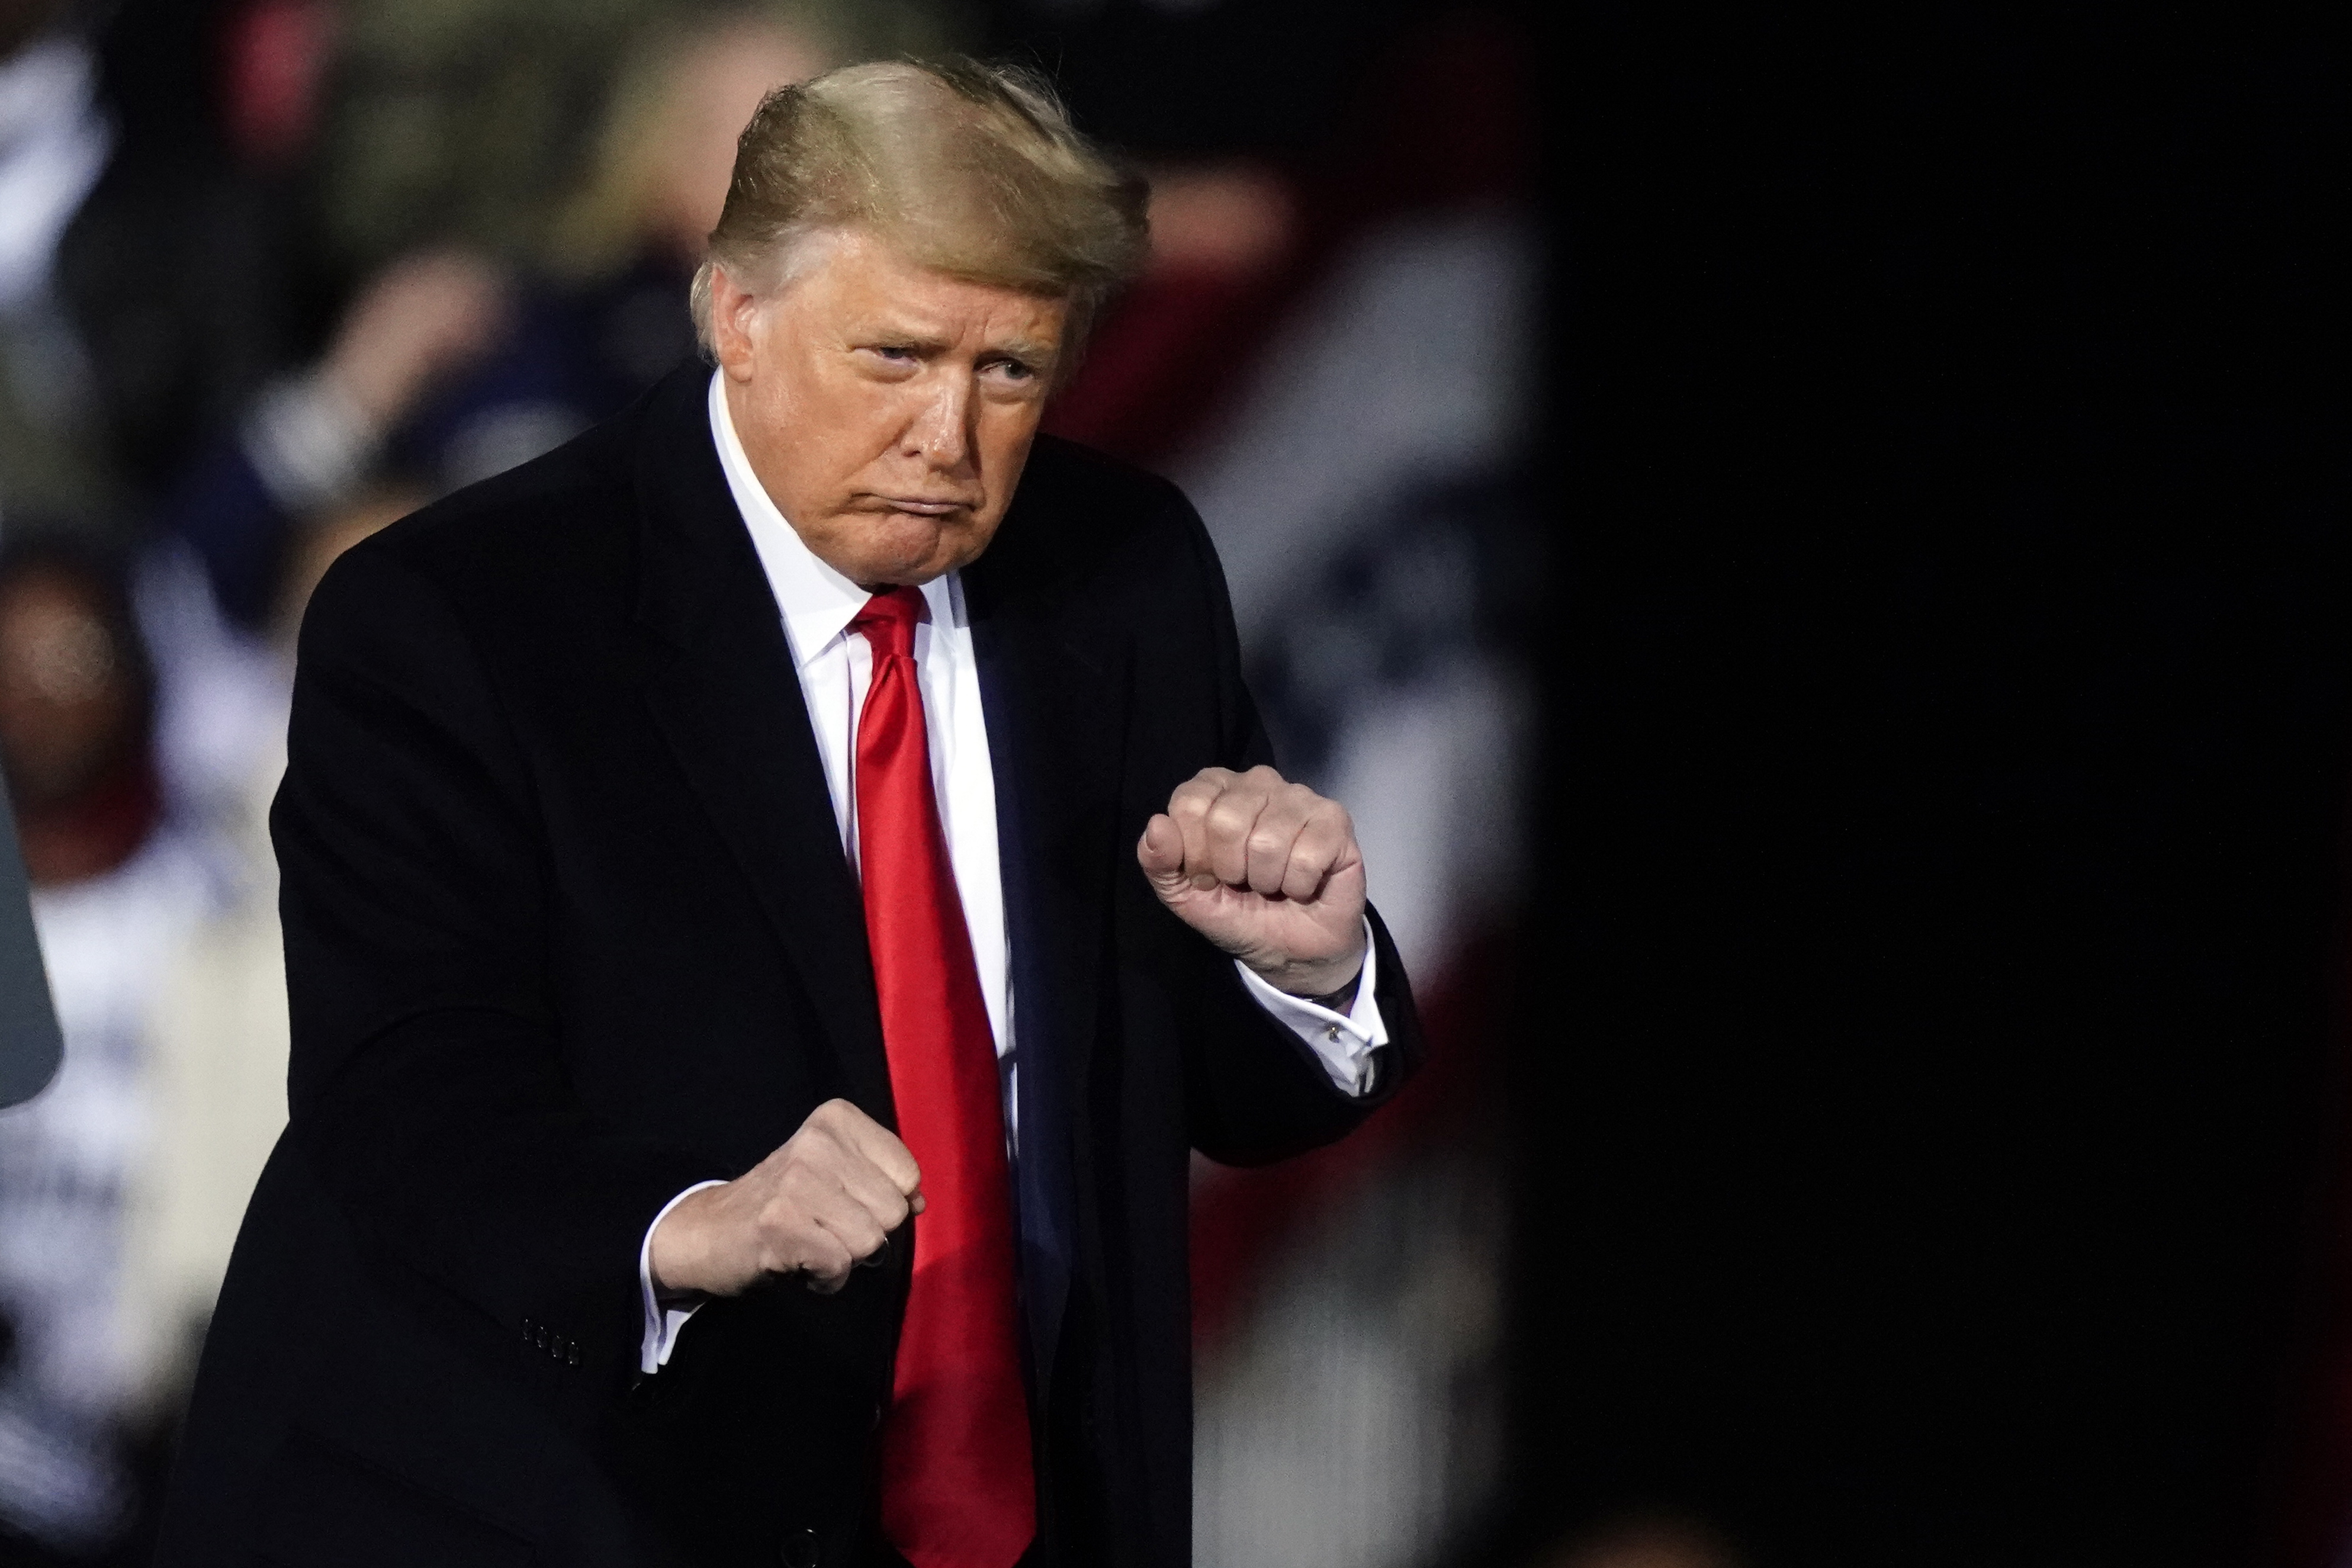 President Donald Trump dances after speaking at a campaign rally in support of Senate candidates Sen. Kelly Loeffler, R-Ga., and David Perdue in Dalton, Ga., Monday, Jan. 4, 2021. (AP Photo/Brynn Anderson)